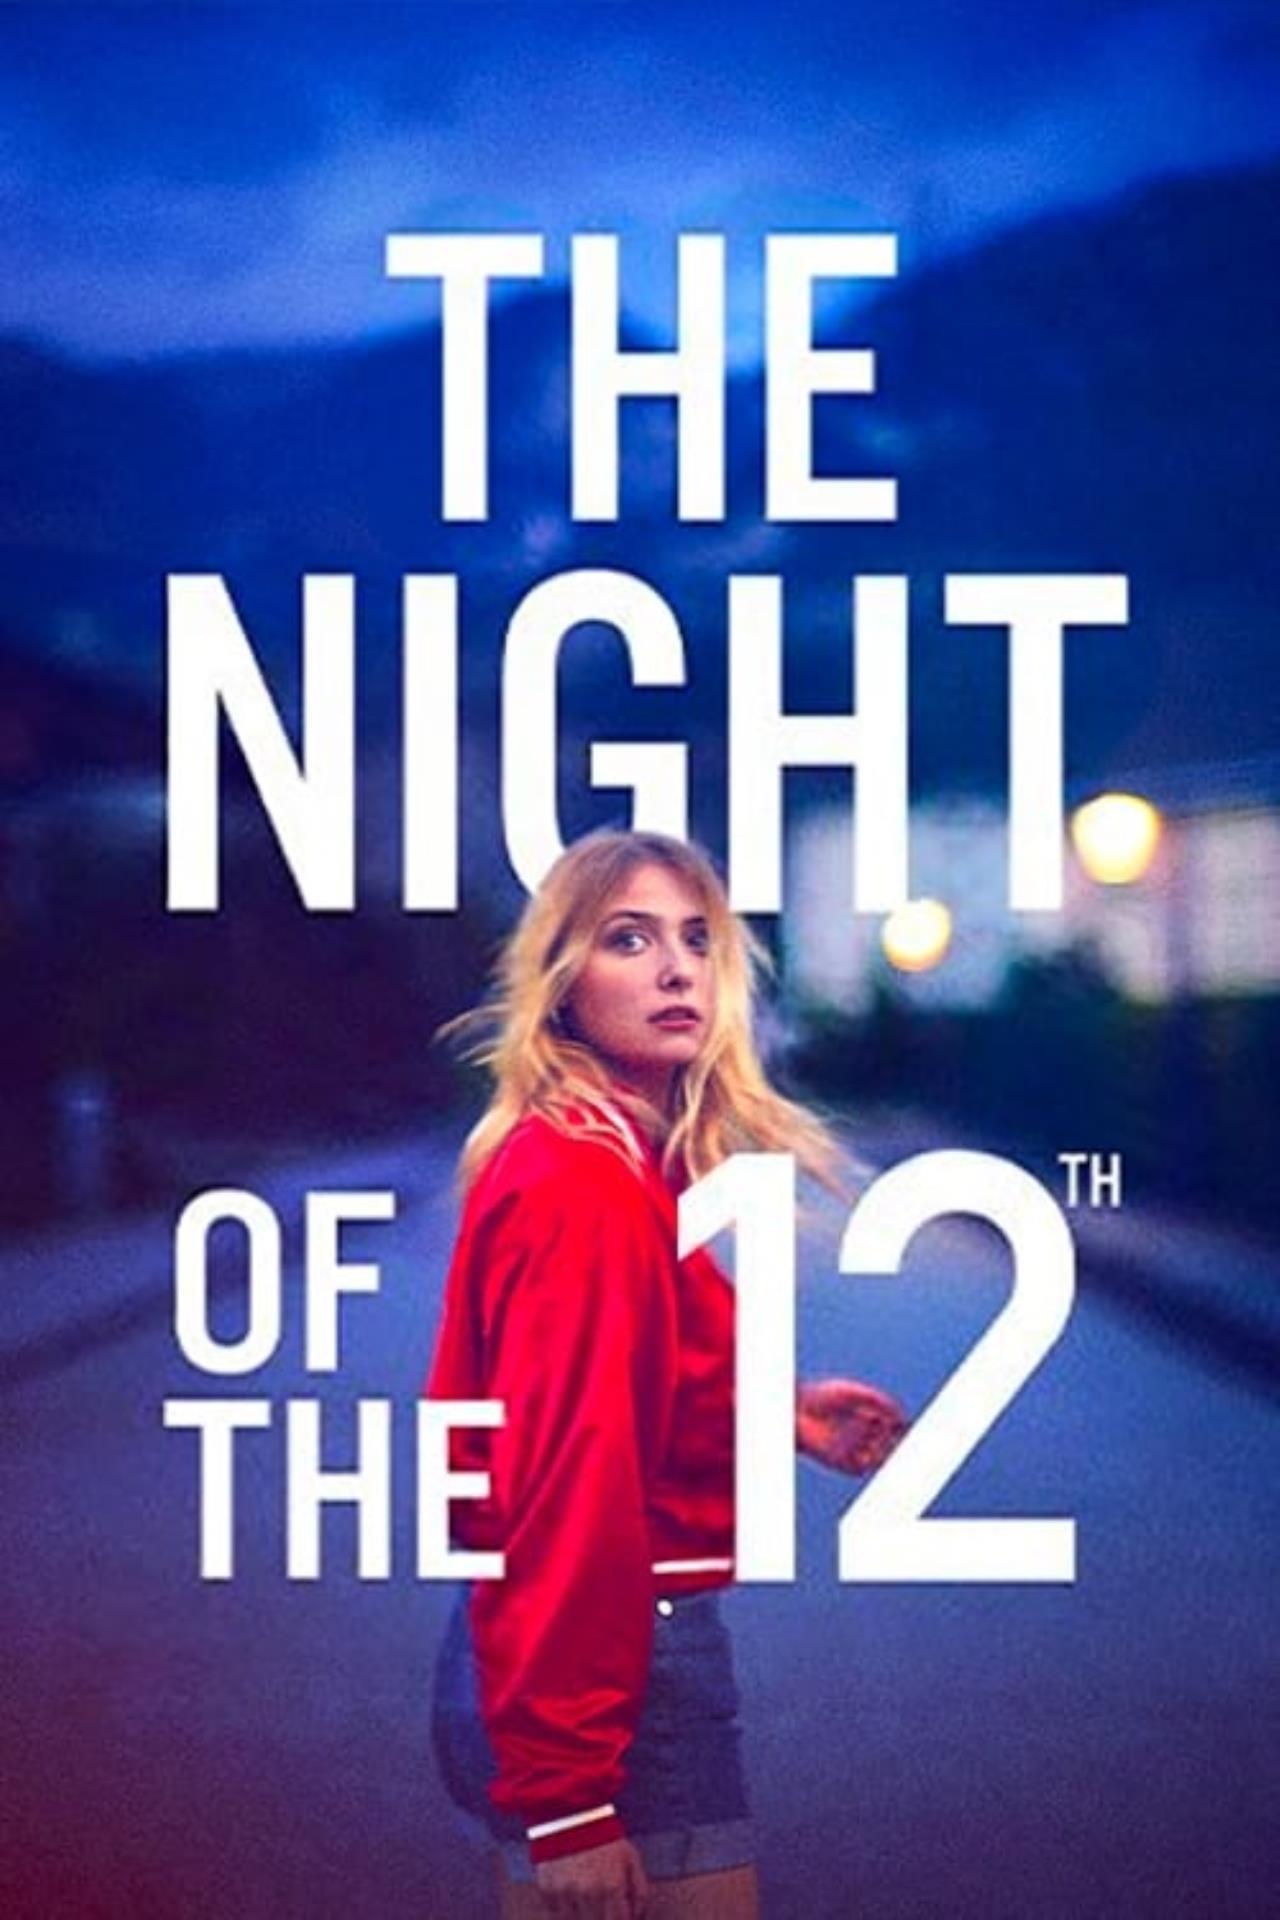 NIGHT OF THE 12TH, THE